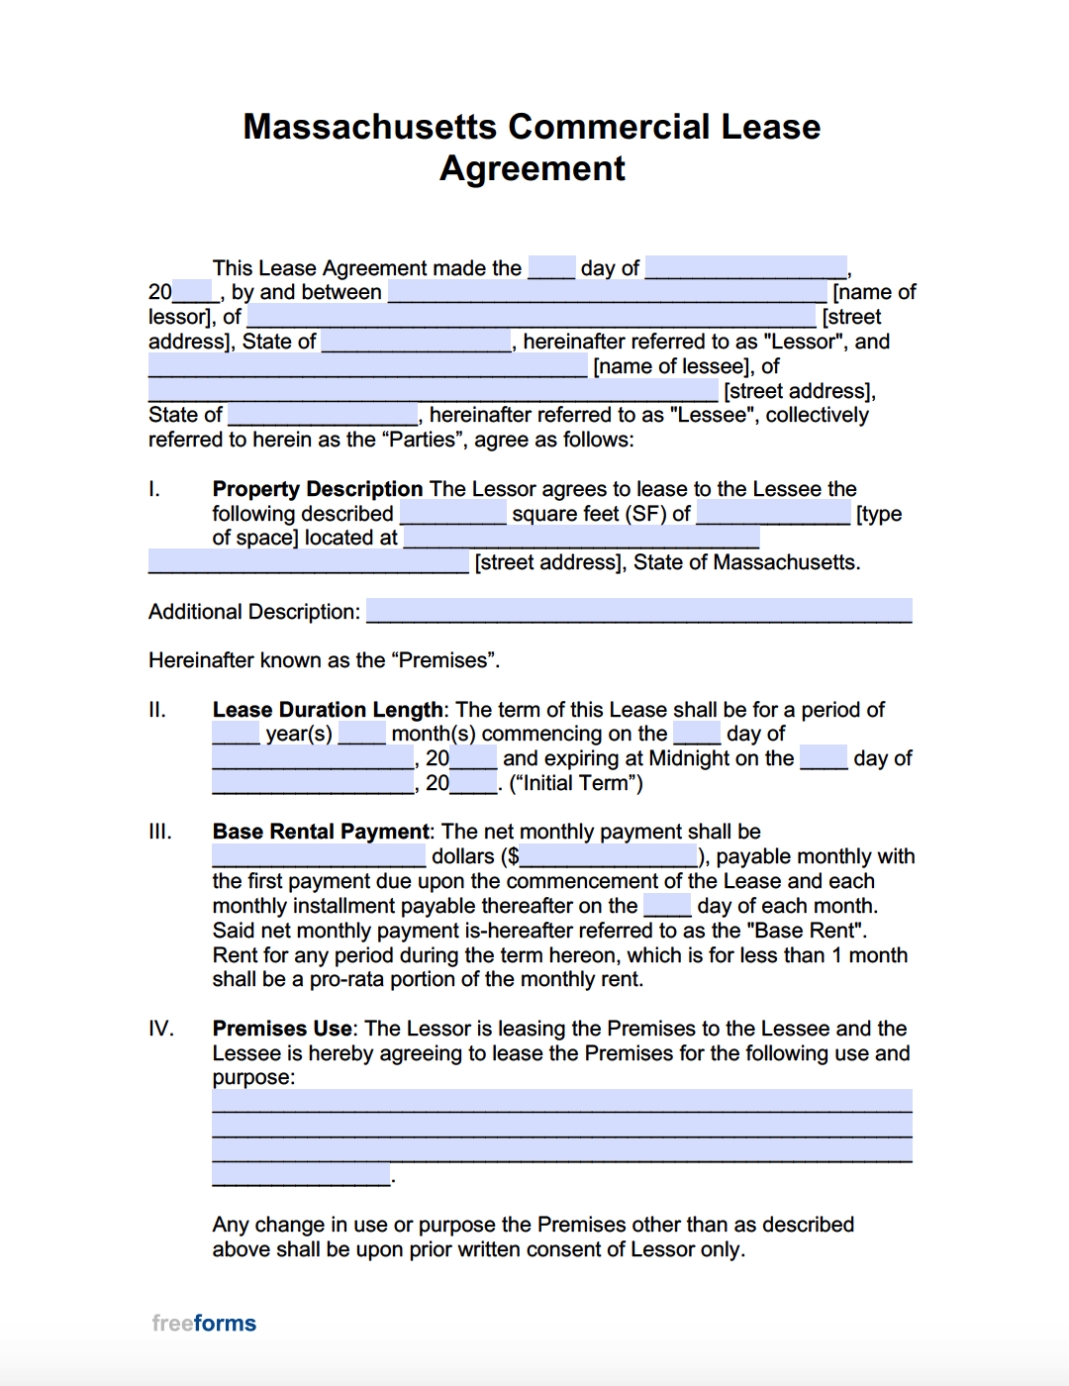 Free Massachusetts Commercial Lease Agreement Template | Pdf | Word with regard to Business Lease Agreement Template Free